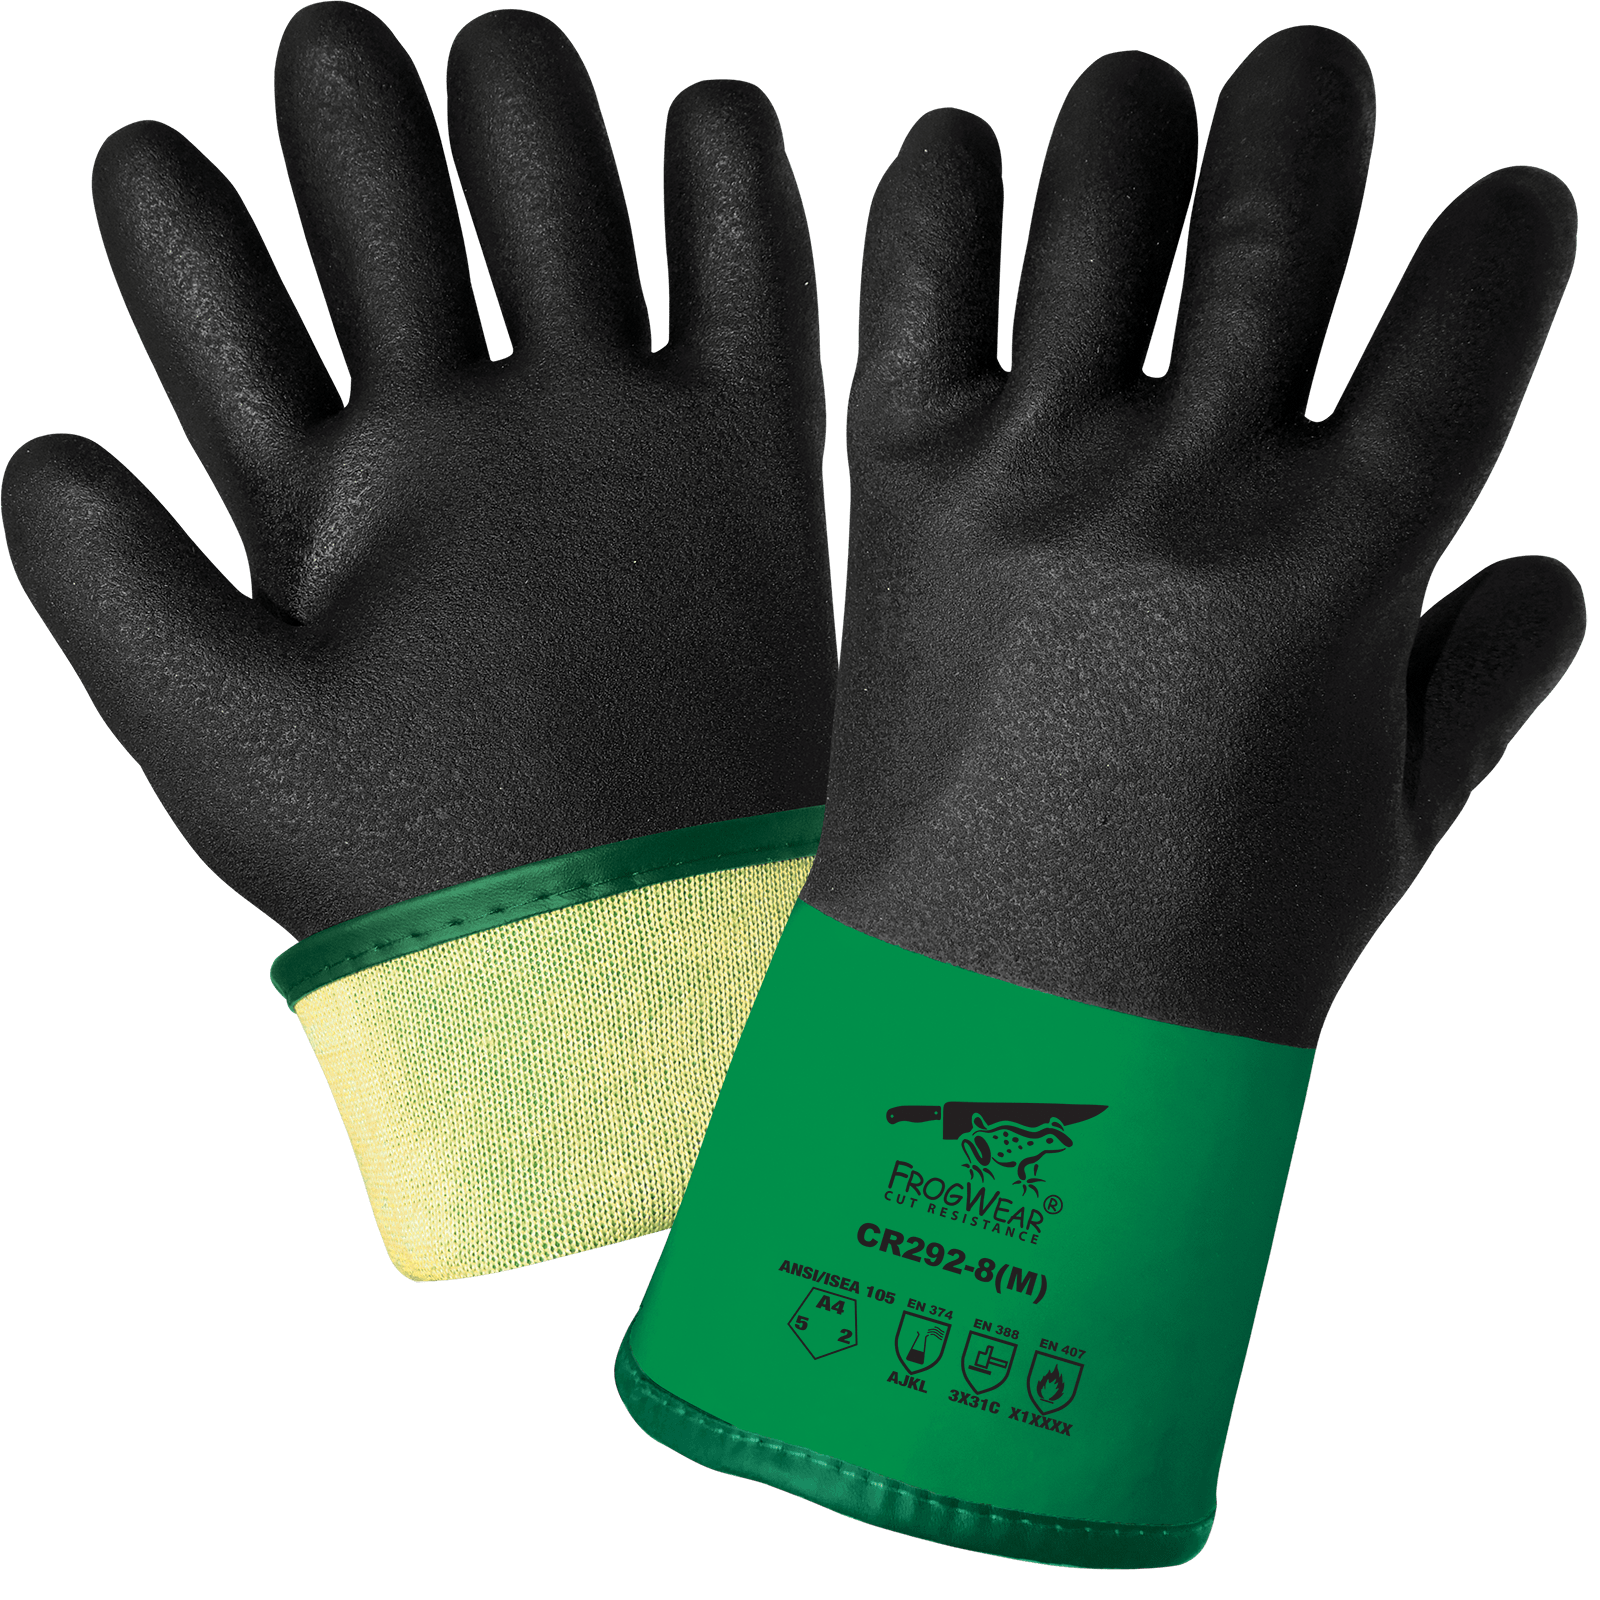 FrogWear® Cut Resistance Performance Chemical, Cut, Abrasion, and Puncture Resistant Gloves, L